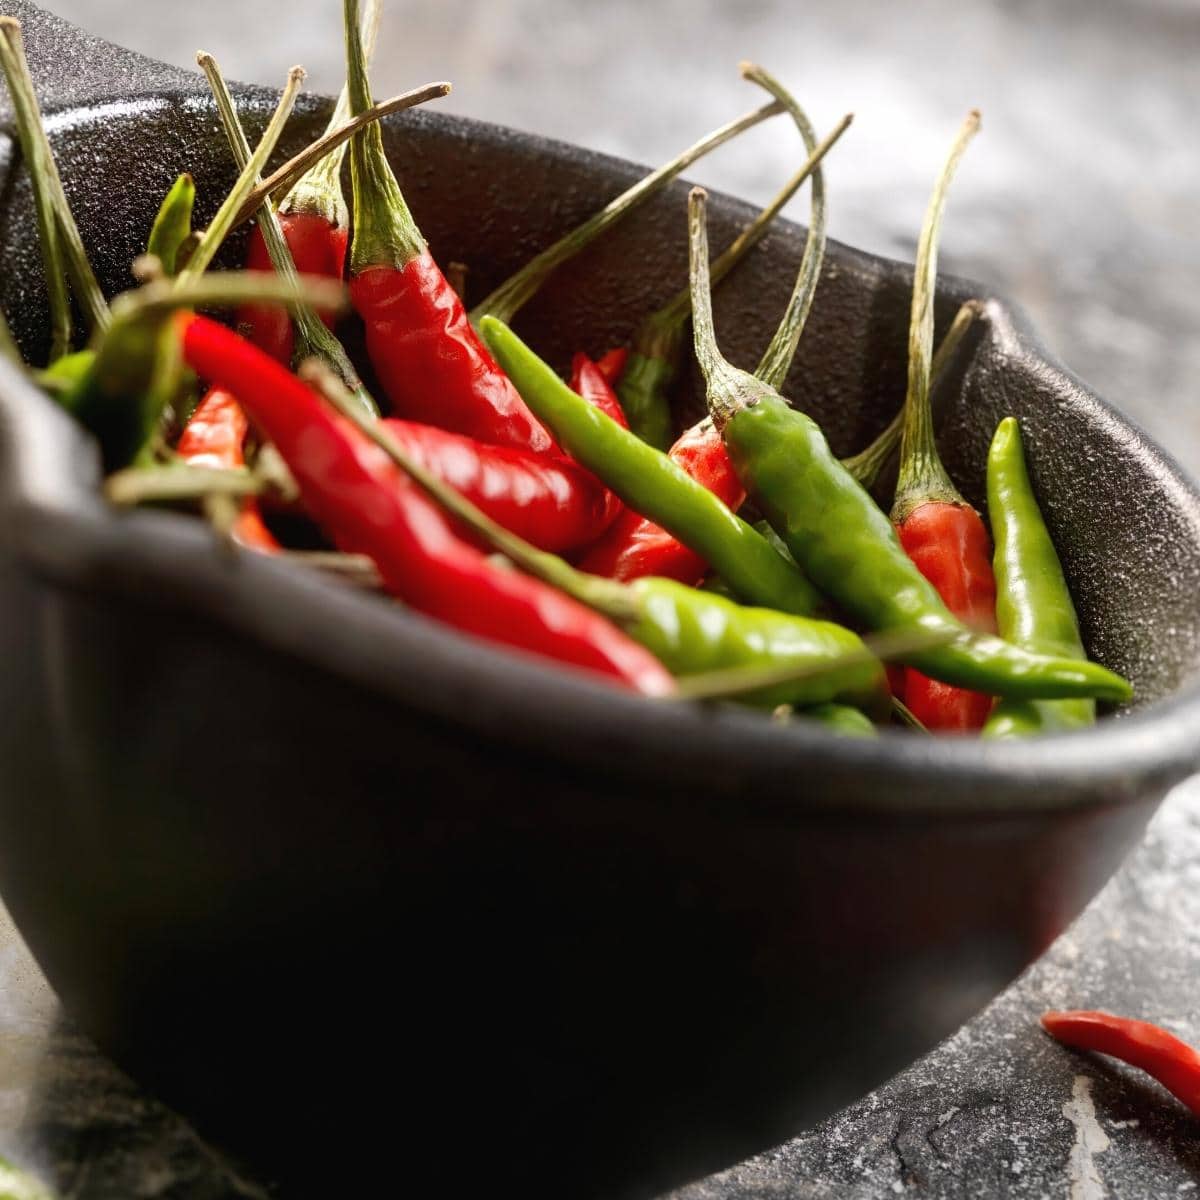 A black bowl filled with red and green Thai chili peppers.